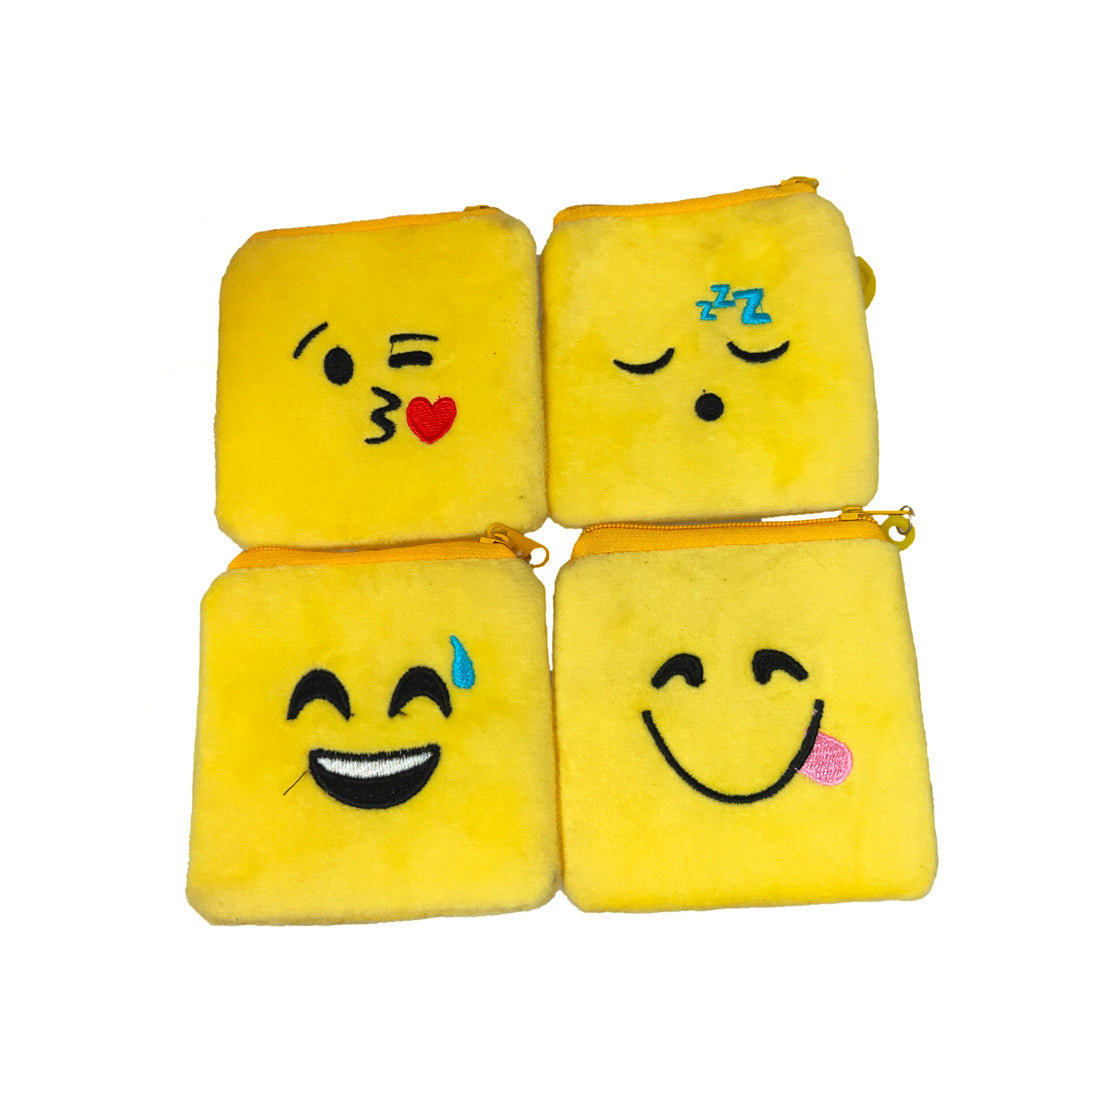 Anokhi Ada Yellow Velvet Smiley Handy Purse/ Pouch/ Wallet for Girls (YB-01)